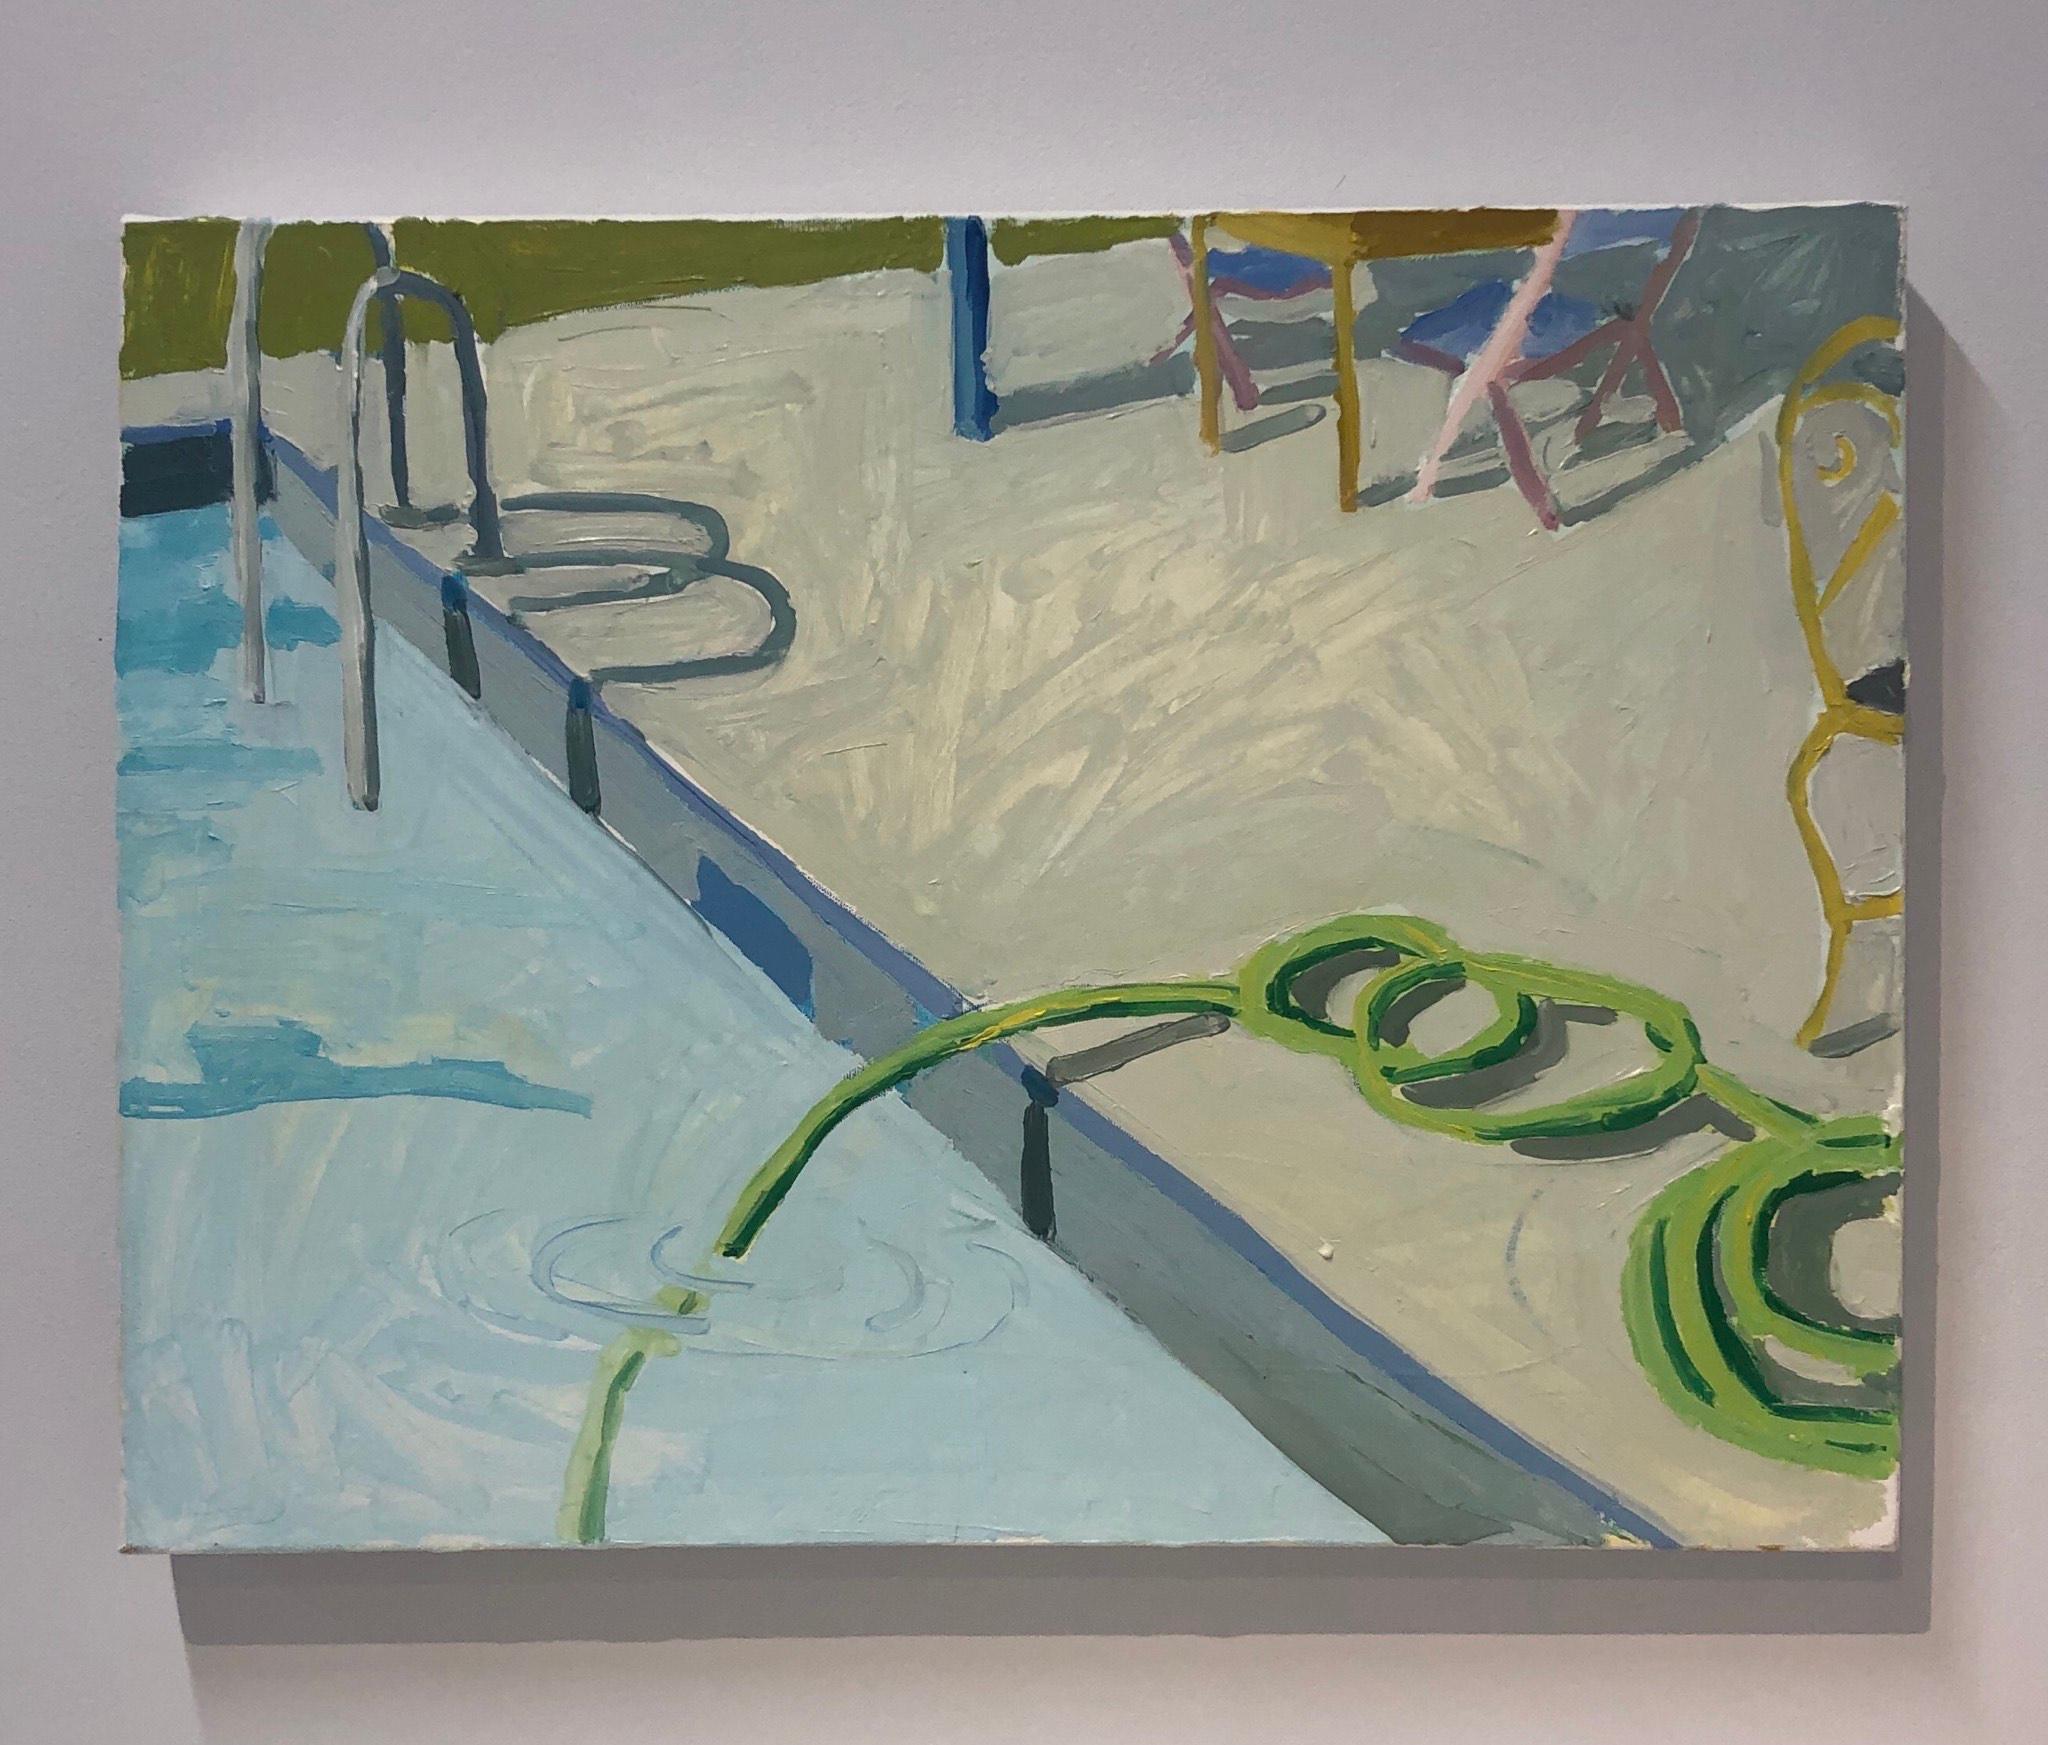 In this landscape painting by Sophie Treppendahl, a swimming pool with a green hose by the edge and a pink chair capture the essence of summer days spent lounging by the pool. The light shades of green and blue are bright and lively as a clear,